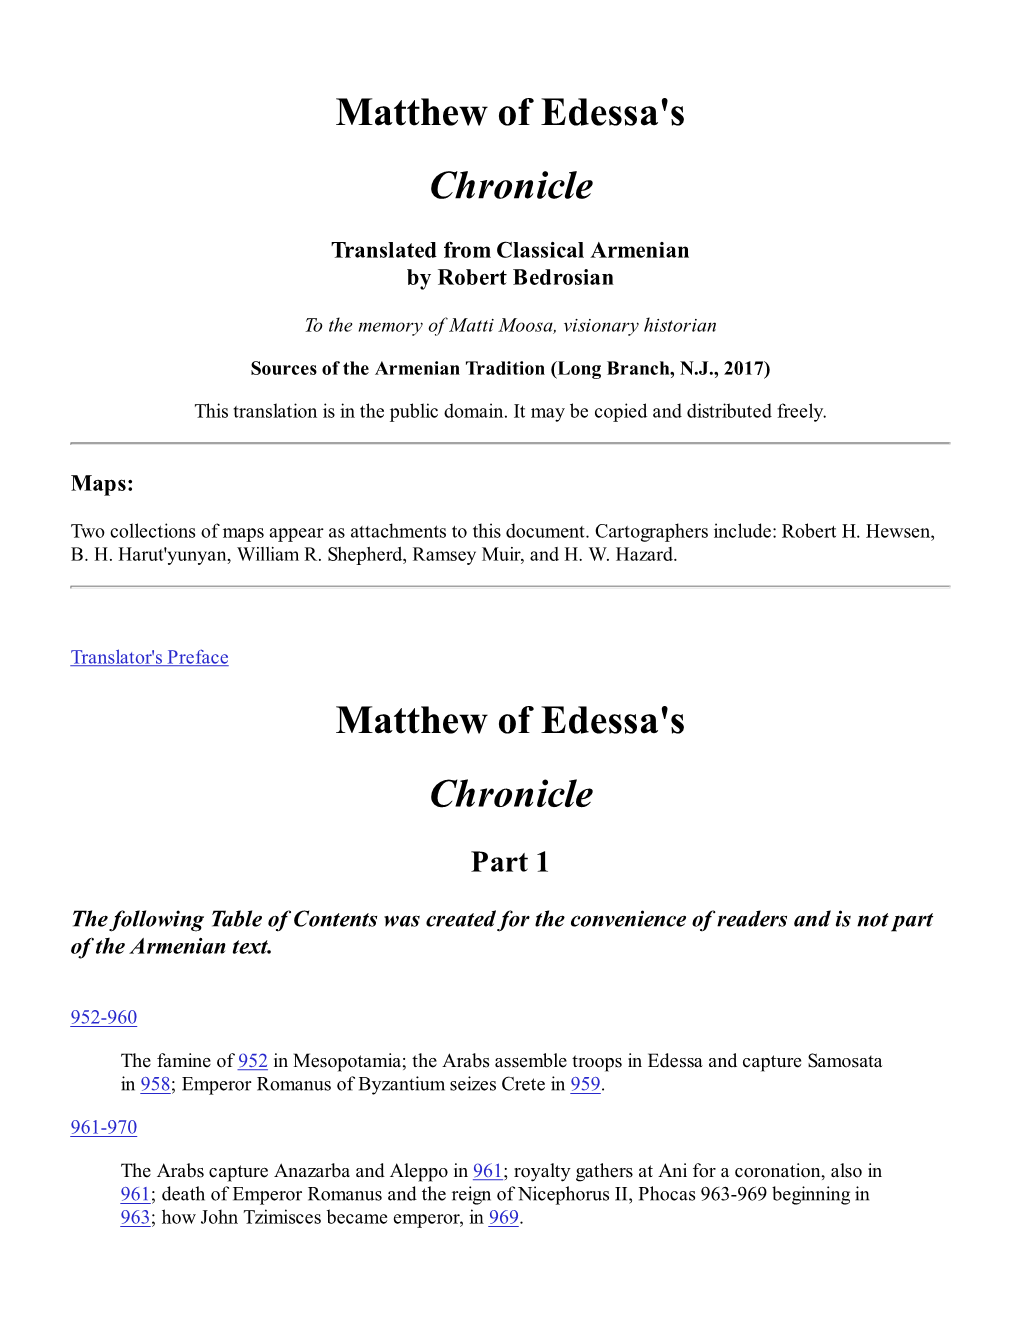 The Chronicle of Matthew of Edessa Translated Below Is a Valuable Source for the History of the Middle East in the 10Th-12Th Centuries